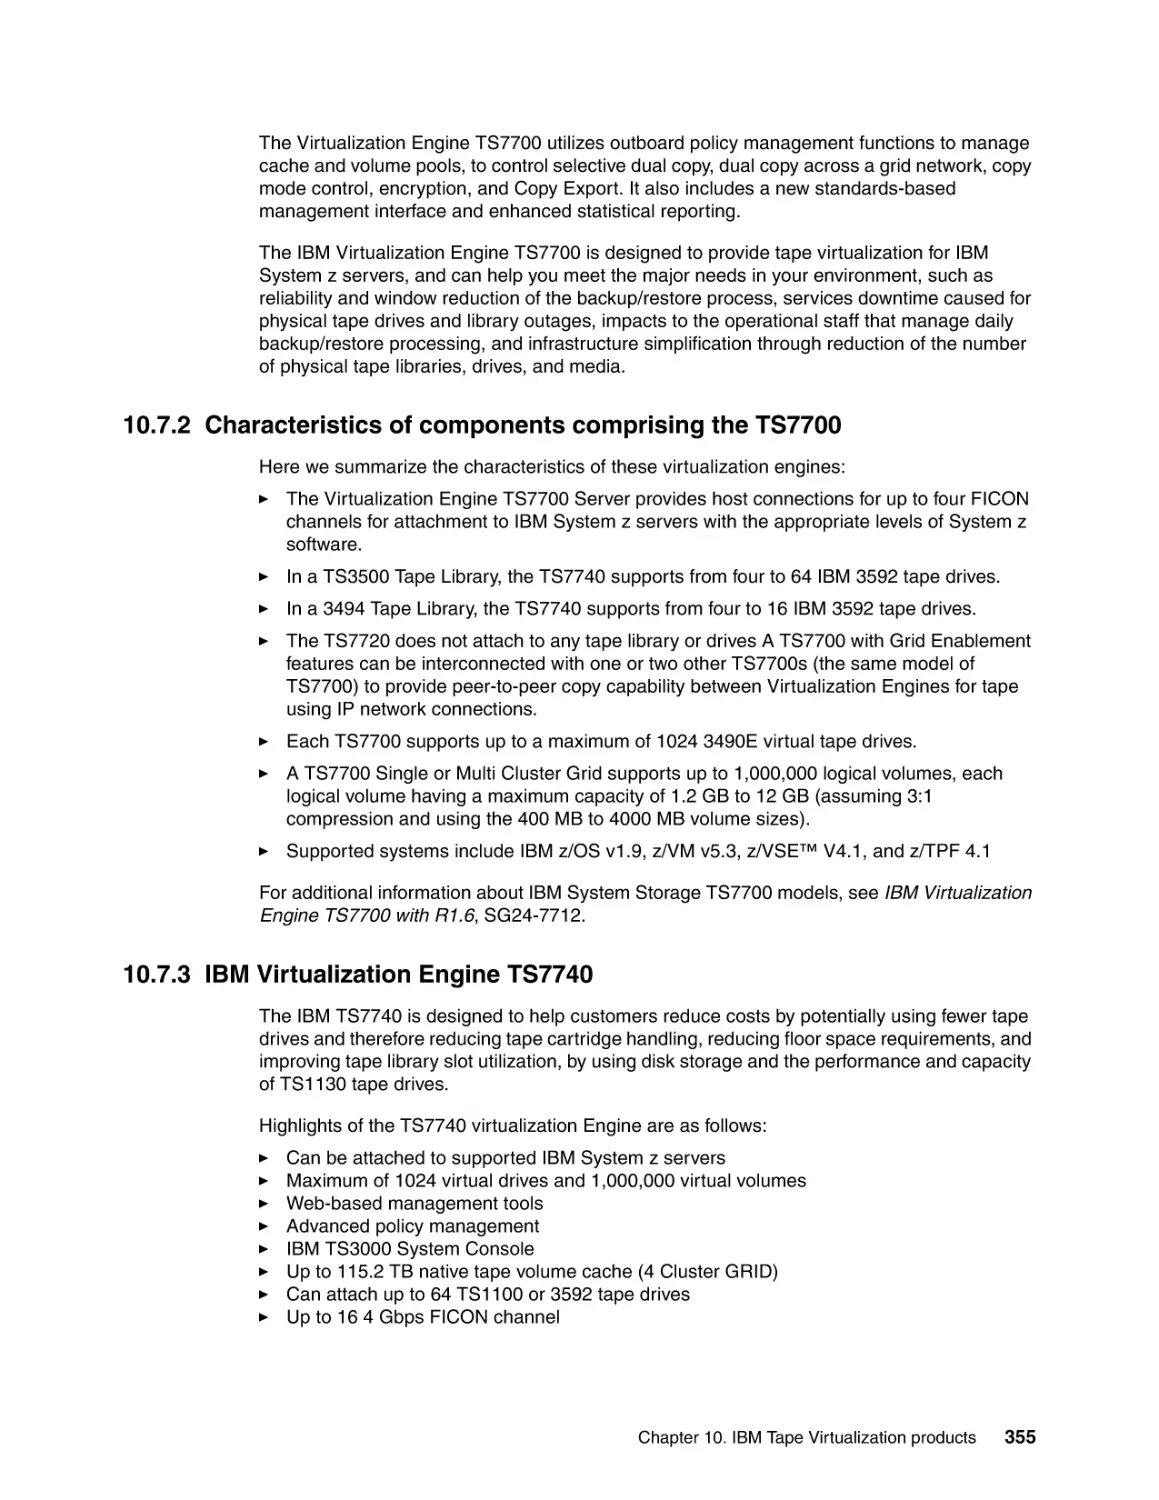 10.7.2 Characteristics of components comprising the TS7700
10.7.3 IBM Virtualization Engine TS7740